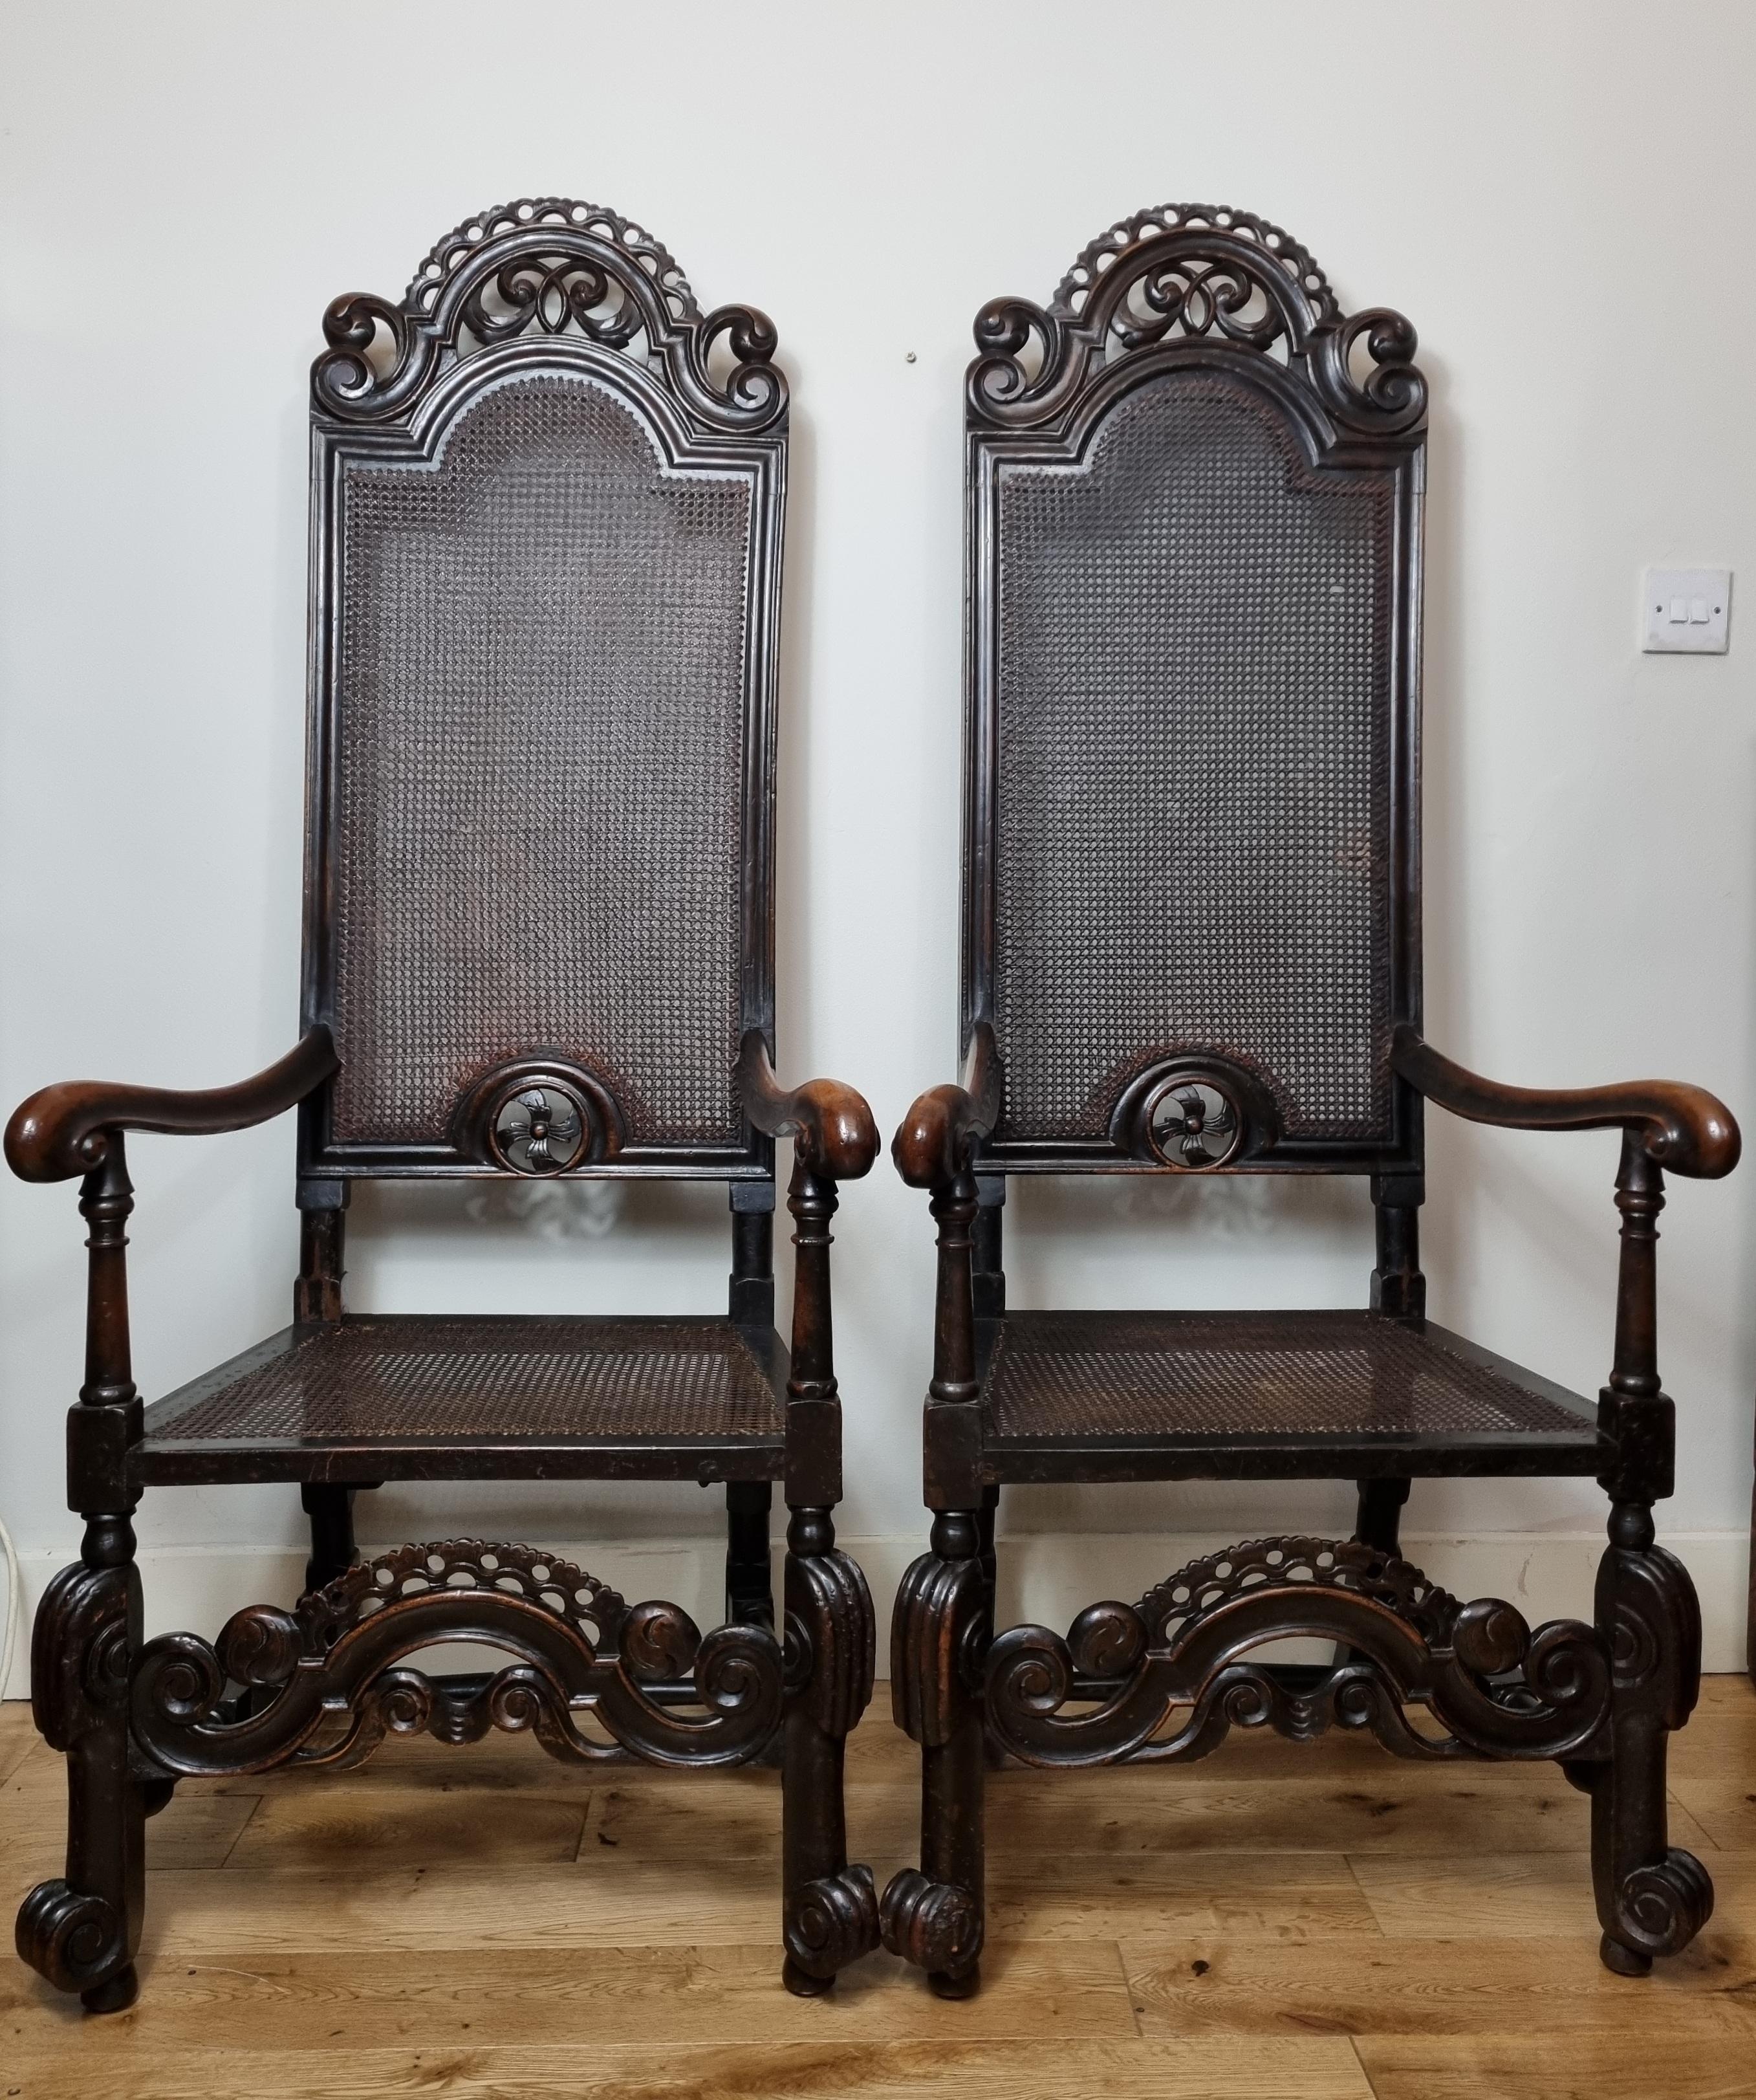 An exceptionally rare matching pair William and Mary carved walnut armchairs , dating to the late 17th century 1690s . Wonderful colour with an original deep rich patina . scrolling back rail, caned back and seat, the backs retaining their original